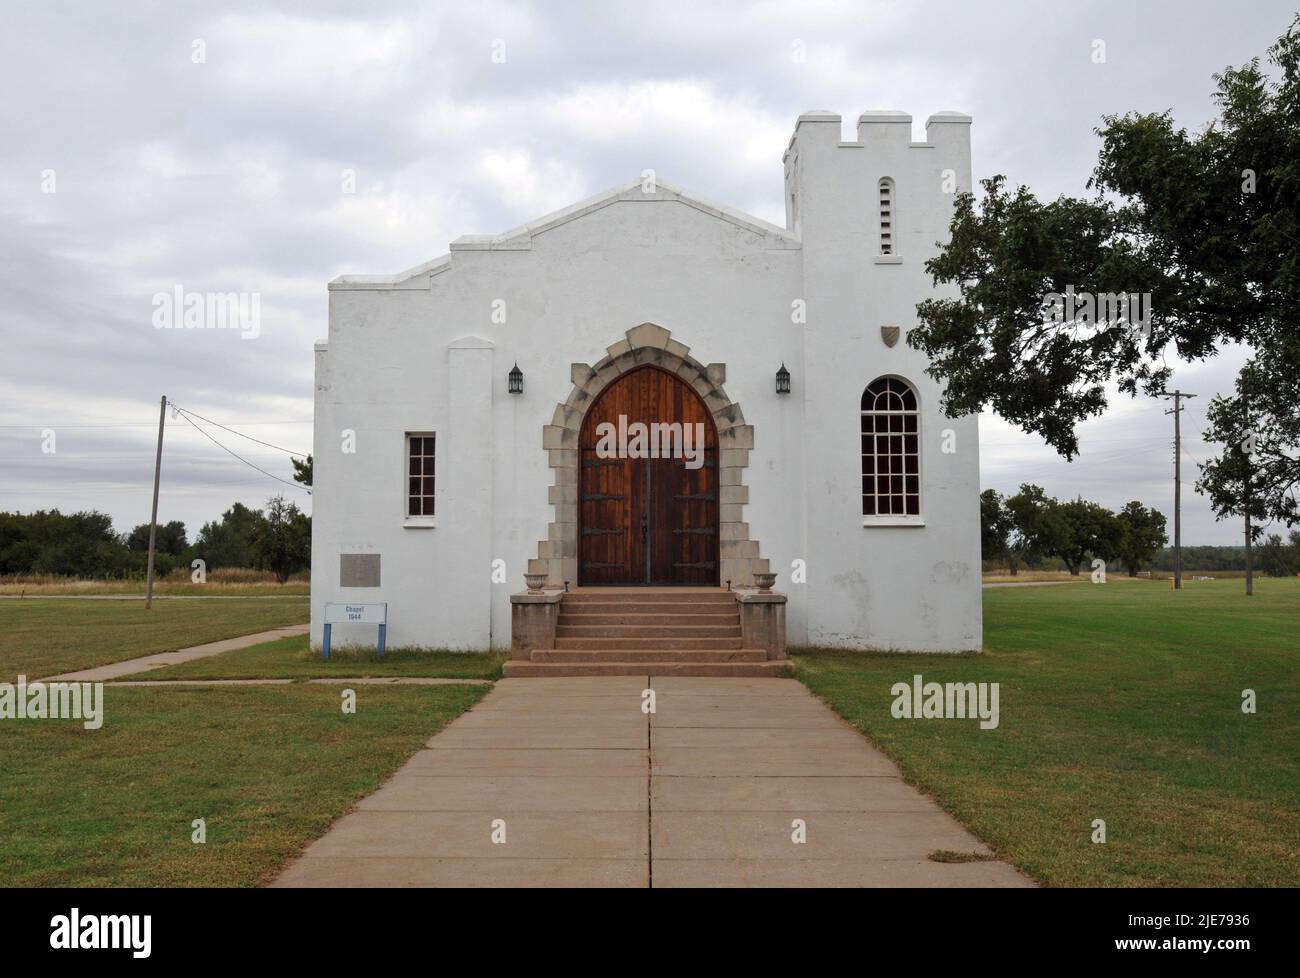 The historic chapel at Fort Reno, a former army fort west of El Reno, Oklahoma, was built by German prisoners of war during the Second World War. Stock Photo